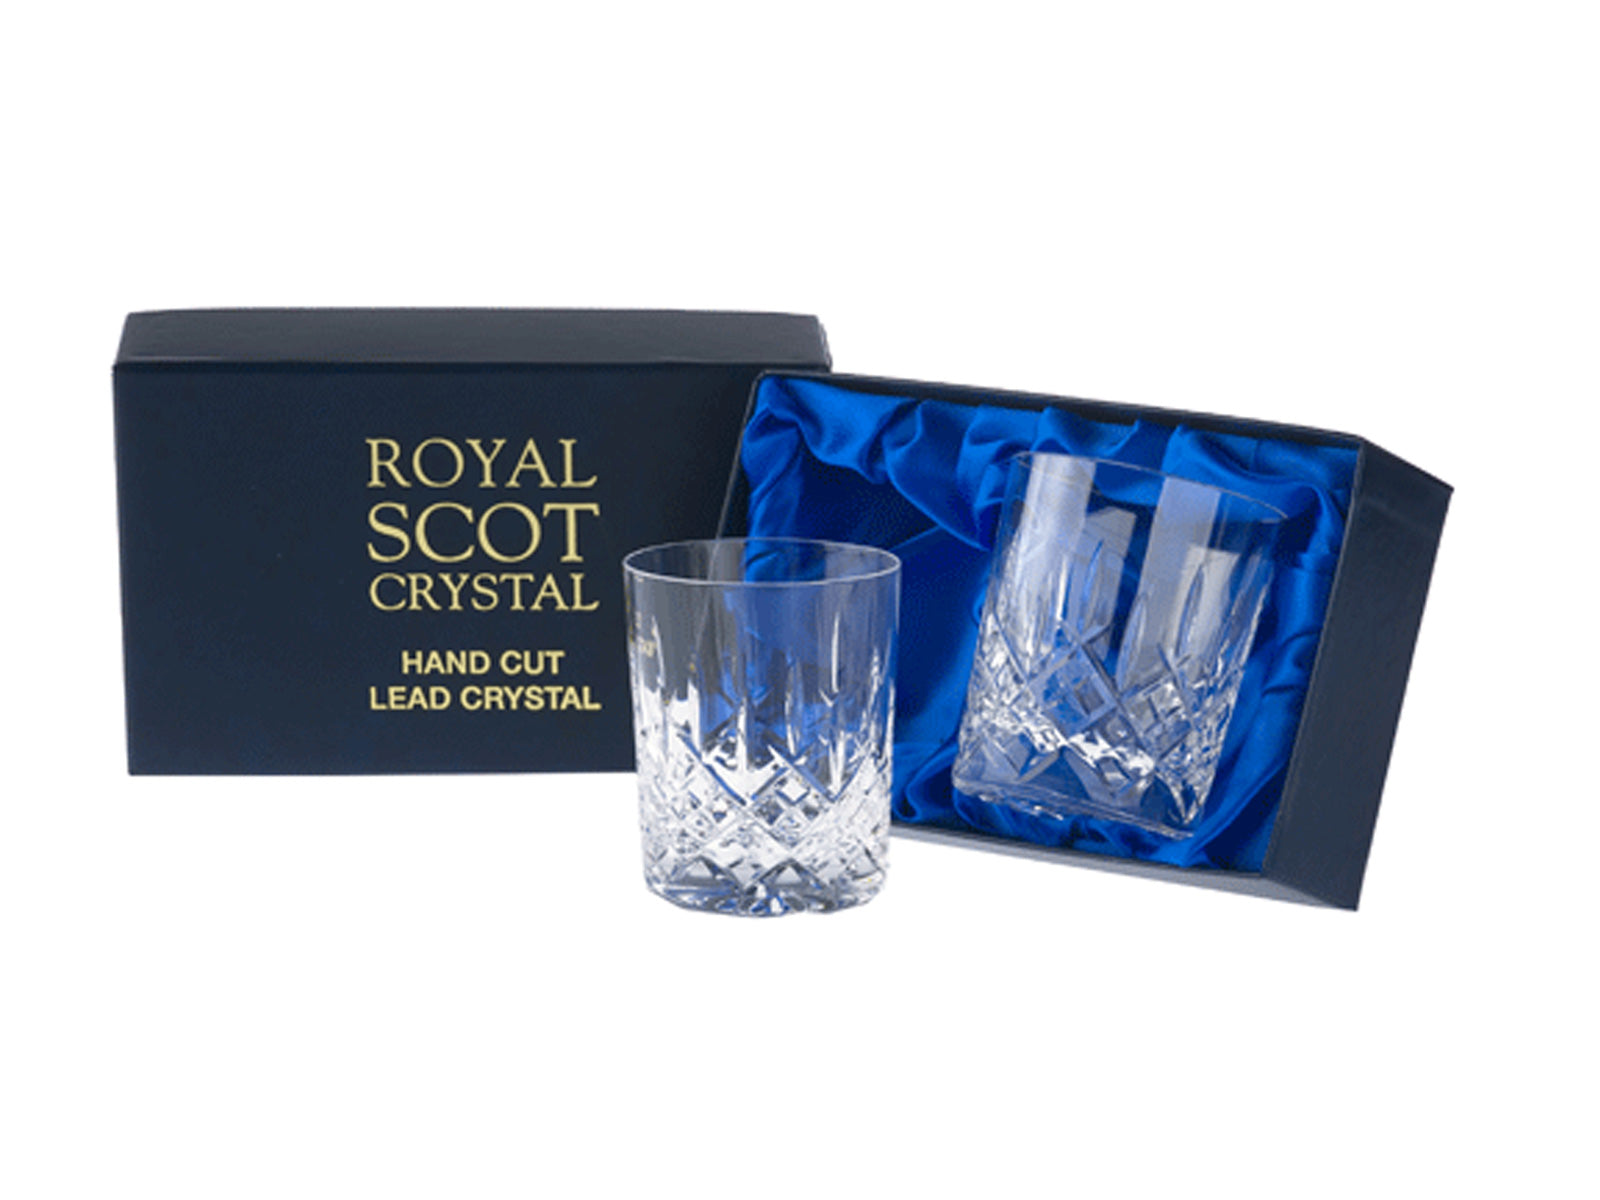 A pair of small whiskey tumblers with a cut design featuring a bed of diamonds and dashes up towards the smooth edge of the glass